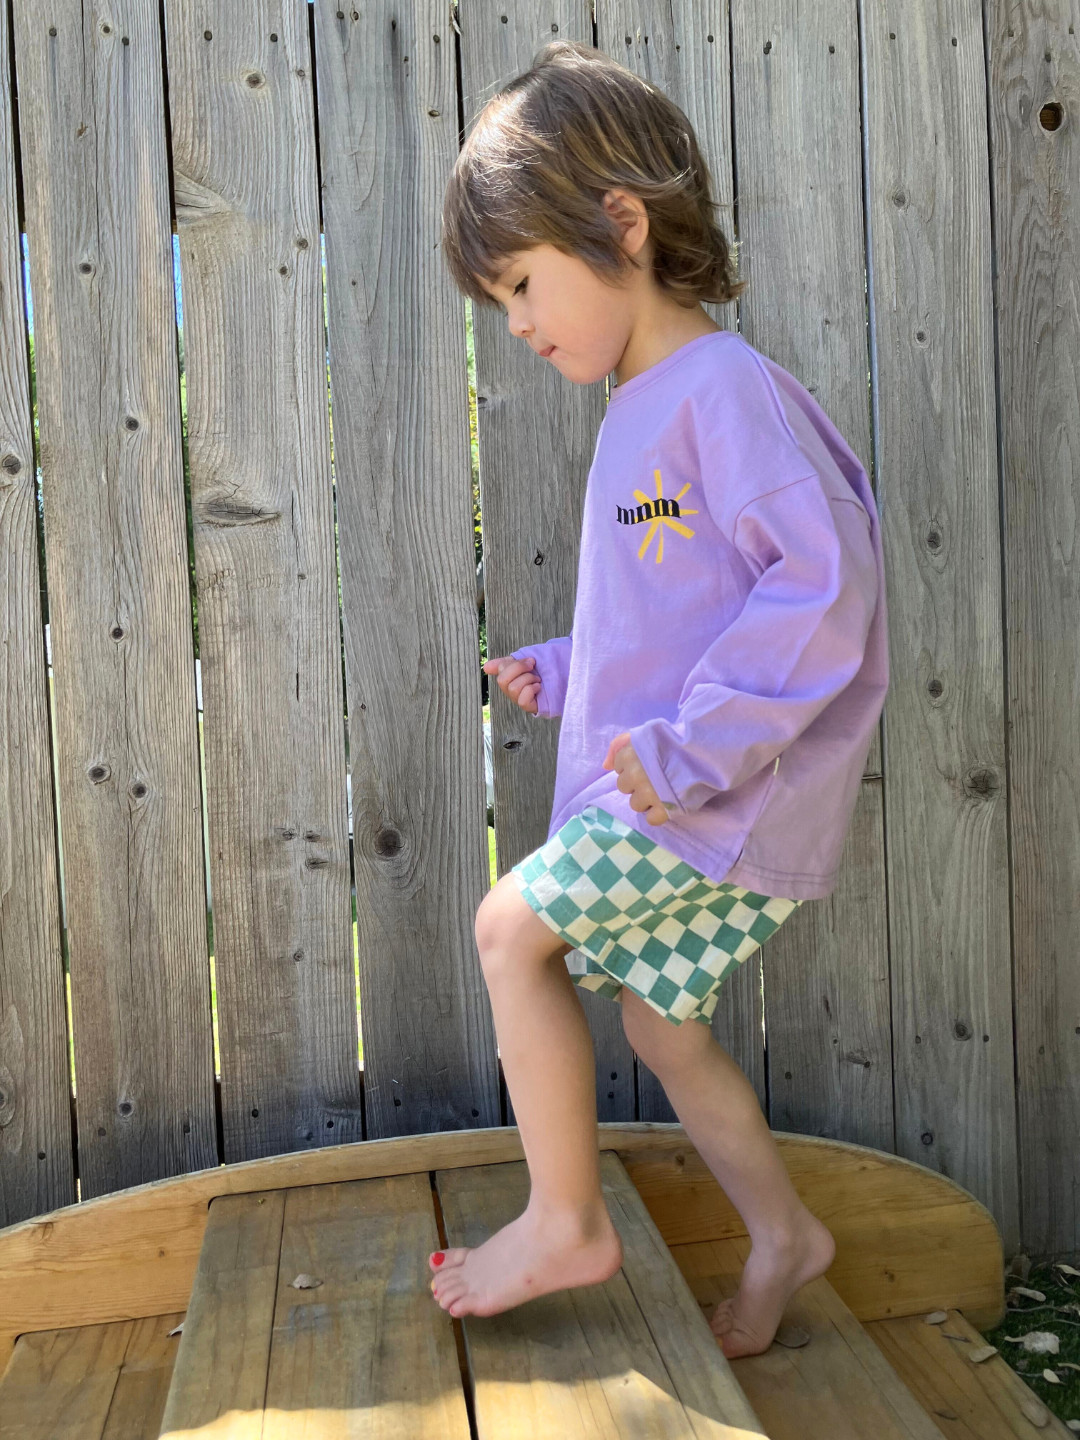 A child wearing the kids Minimal Longsleeve Tee in purple, paired with checkerboard patterned shorts in teal and ivory. He is clibing a small wooden step in front of a wooden fence.